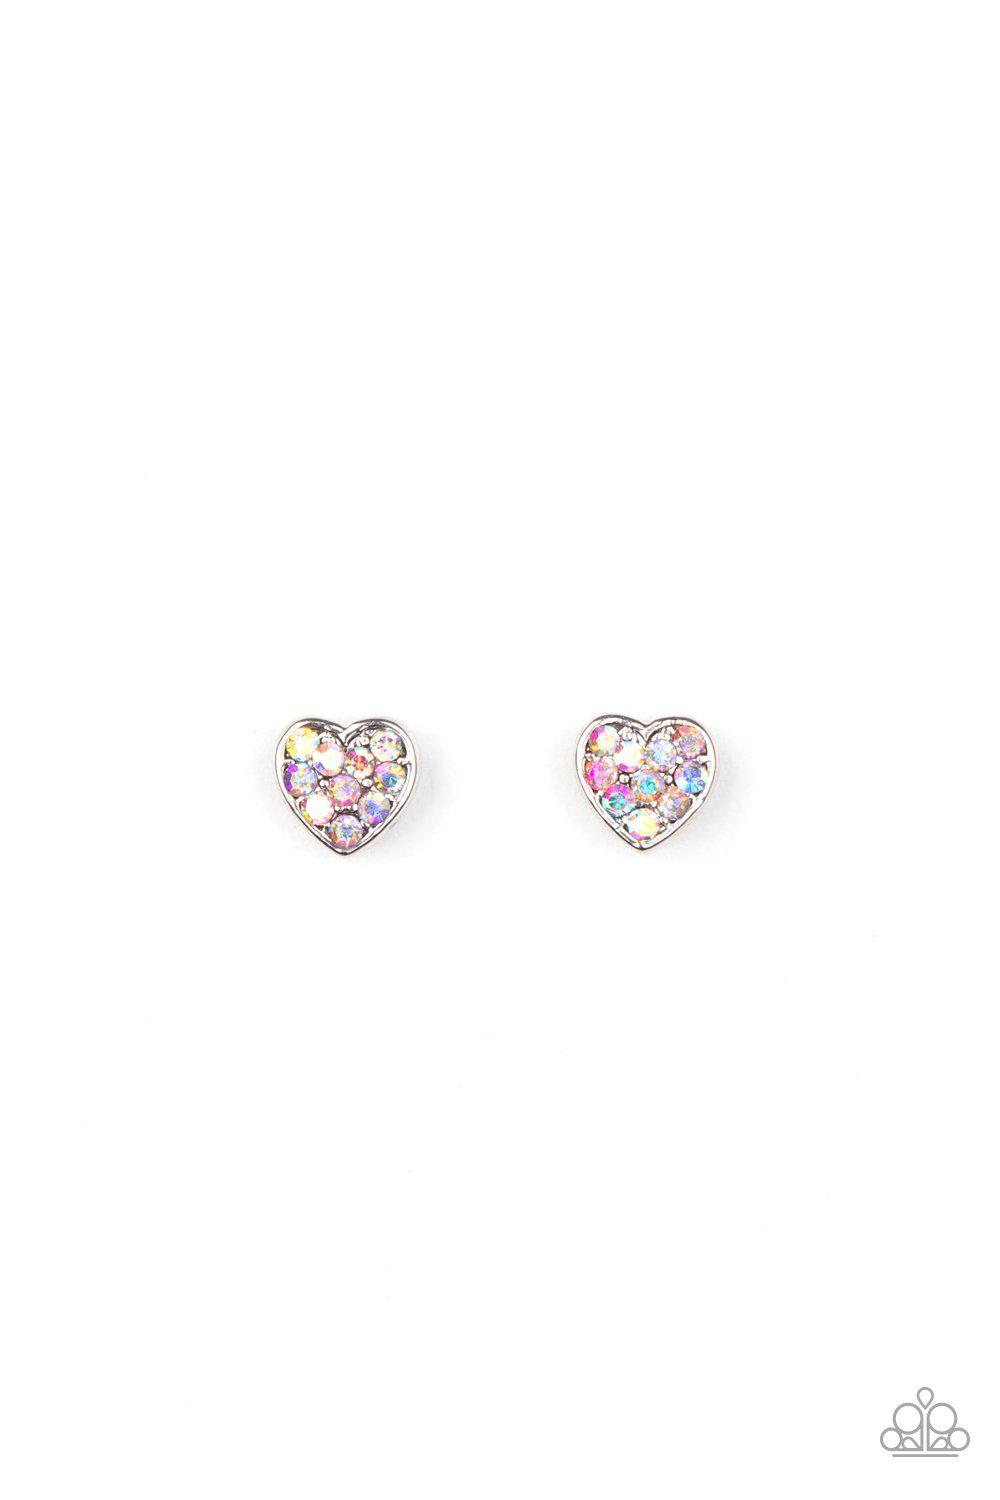 Starlet Shimmer Children&#39;s Iridescent Rhinestone Post Earrings v2 - Paparazzi Accessories (set of 10 pairs)-CarasShop.com - $5 Jewelry by Cara Jewels